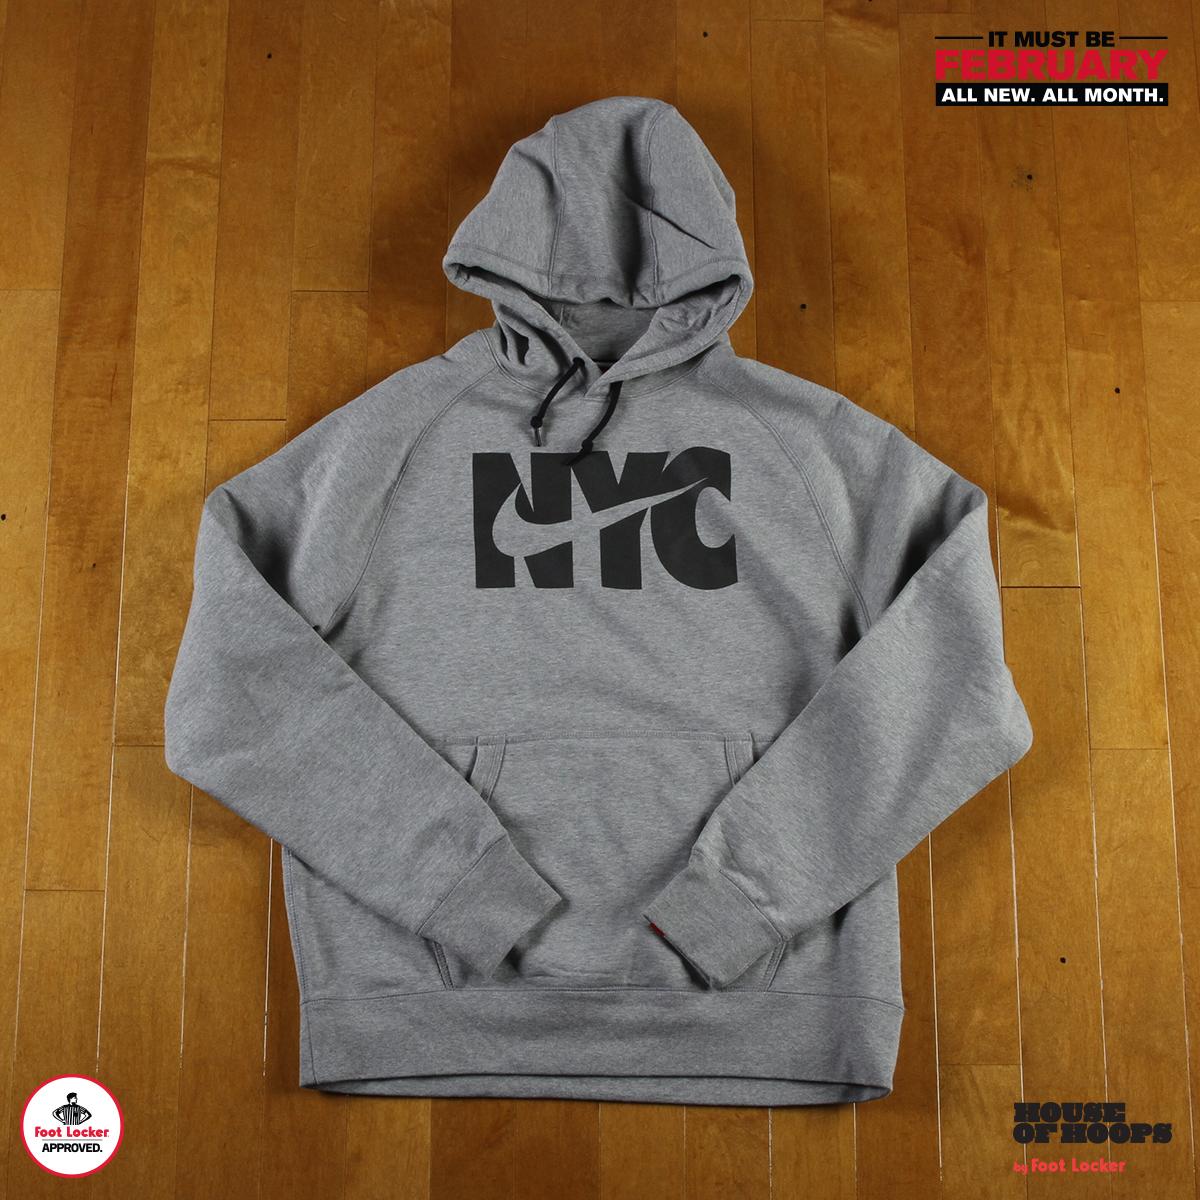 Foot Twitter: "Warmth. Comfort. Battle the New York in this #Nike NYC Hoodie. Available in stores. #AllNewAllMonth http://t.co/A7cuN2bY08" / Twitter